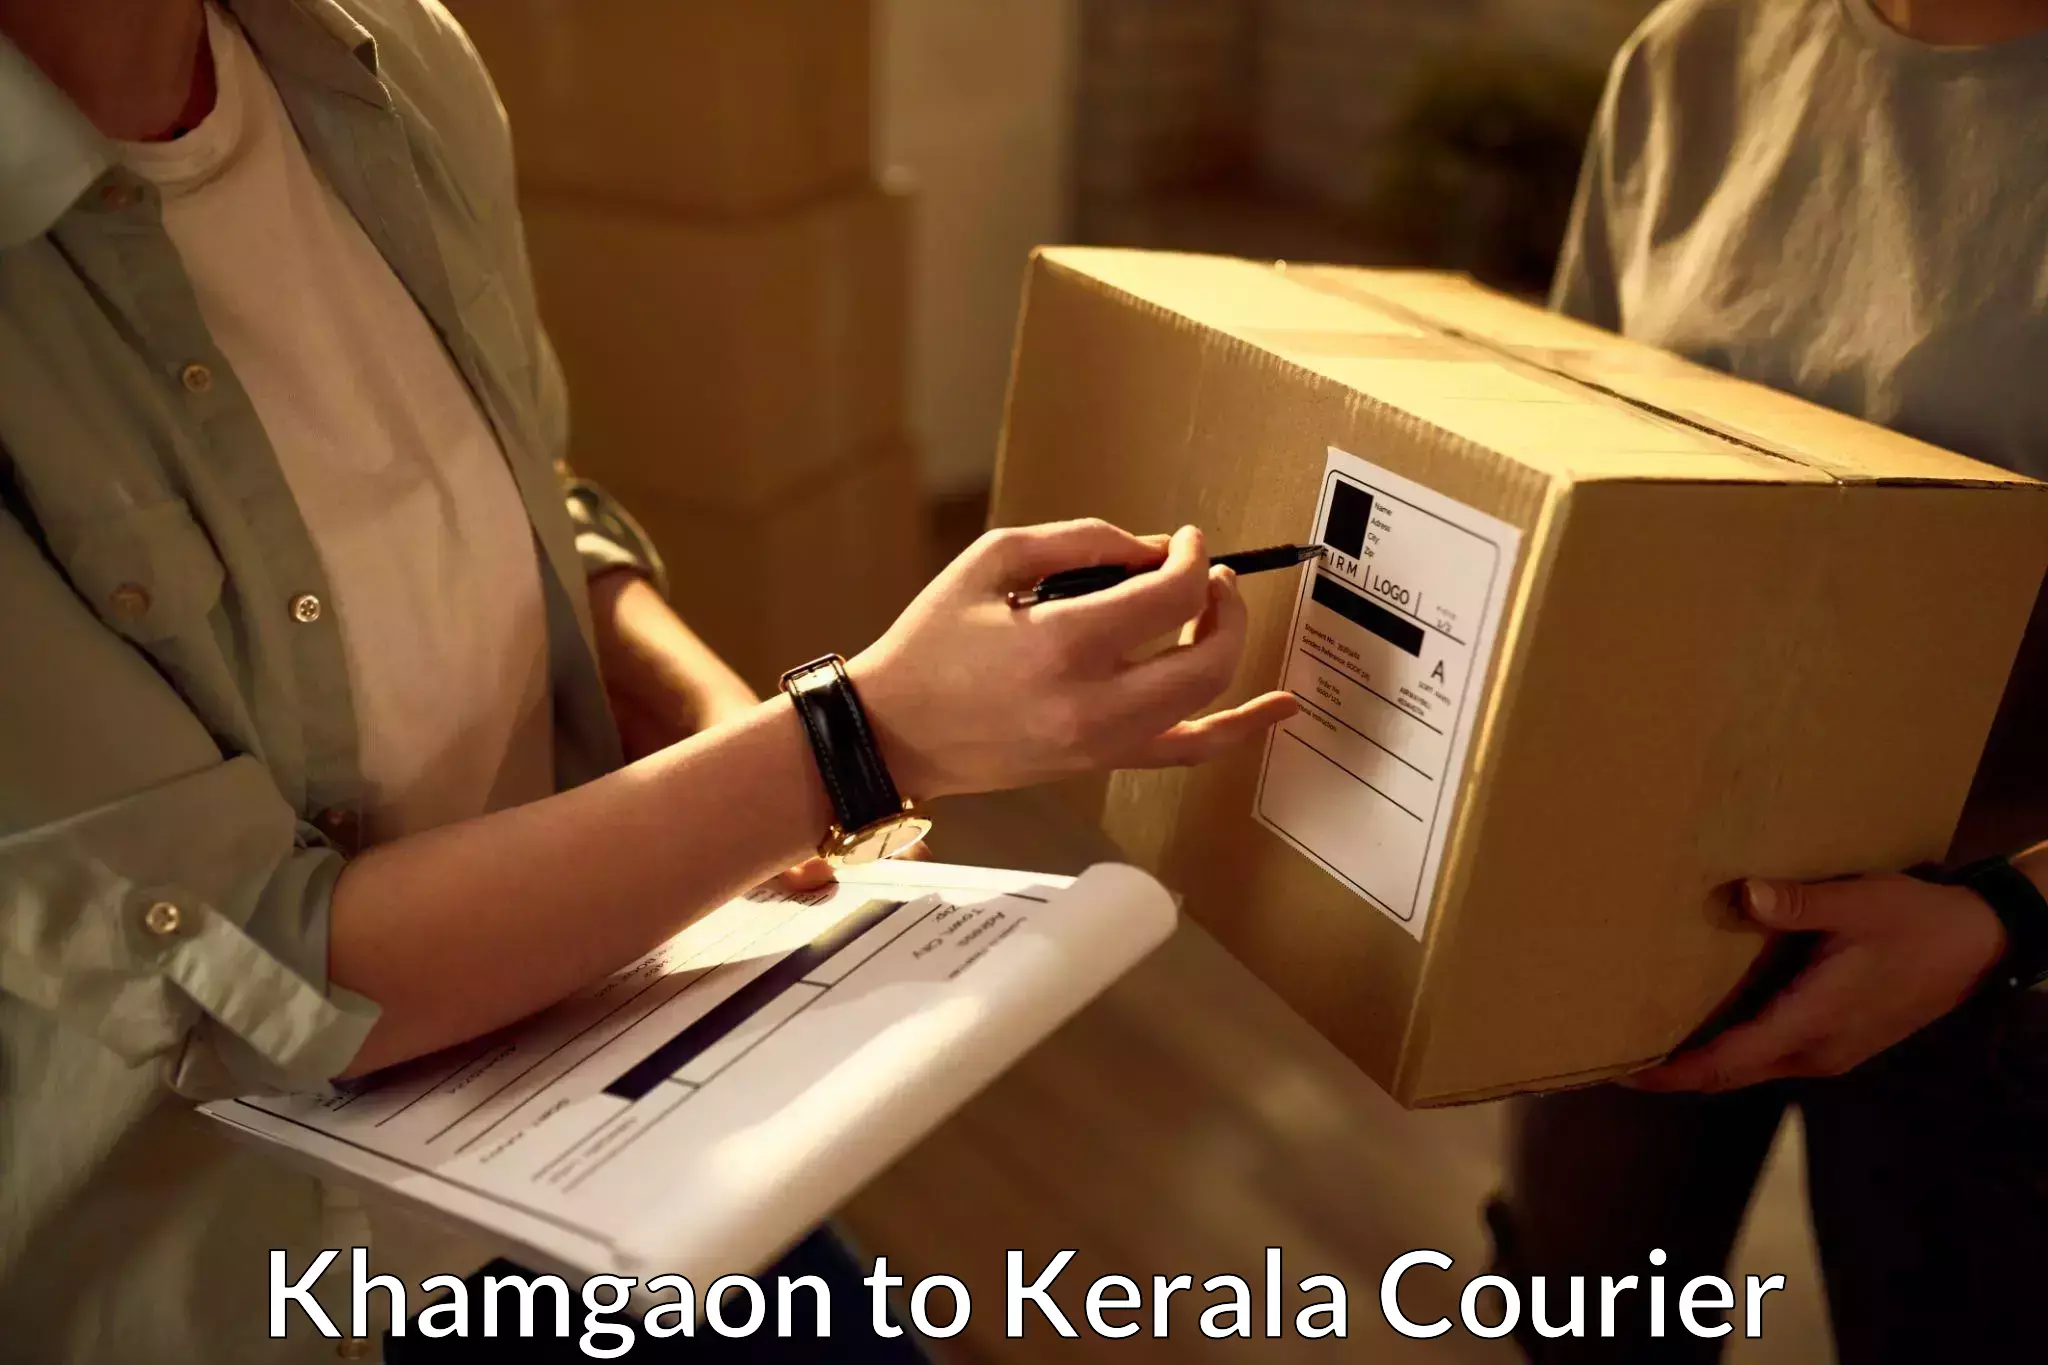 Reliable delivery network Khamgaon to Cochin University of Science and Technology